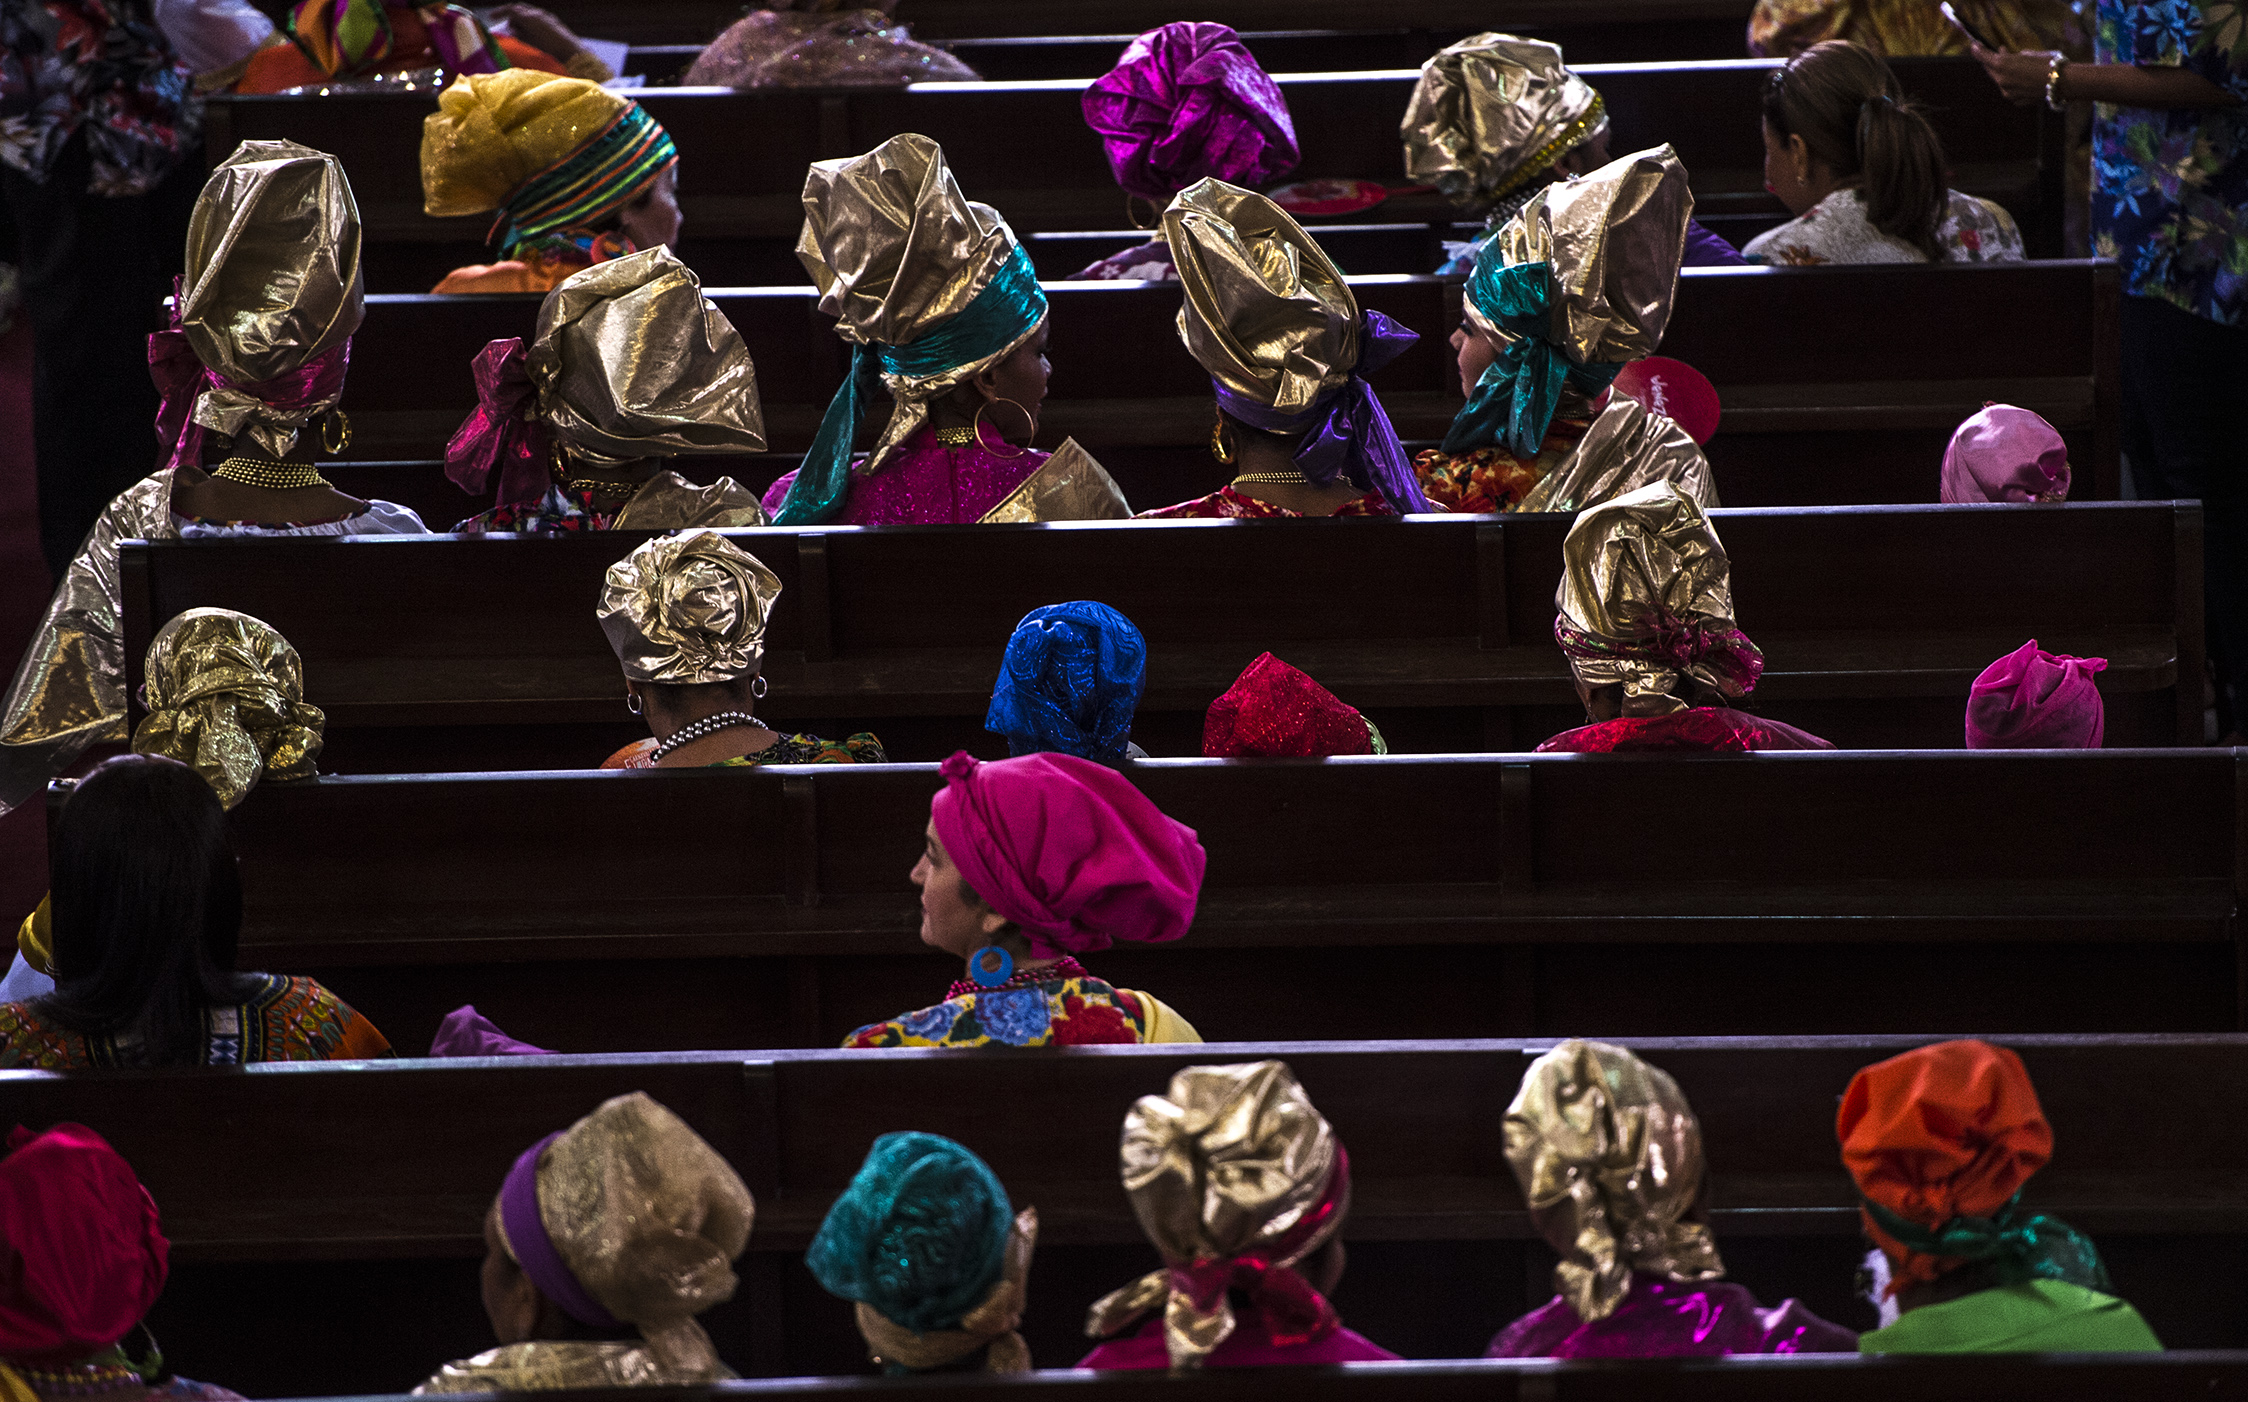 Women dressed as "madamas" attend a mass before the beginning of the Carnival in El Callao, Bolivar state, Venezuela on February 26, 2017.  El Callao's carnival was recently named Unesco's Intangible Cultural Heritage of Humanity and is led by the madamas, the pillars of Callaoense identity representing Antillean matrons considered the communicators of values, who dance and wear colourful dresses. / AFP PHOTO / JUAN BARRETO